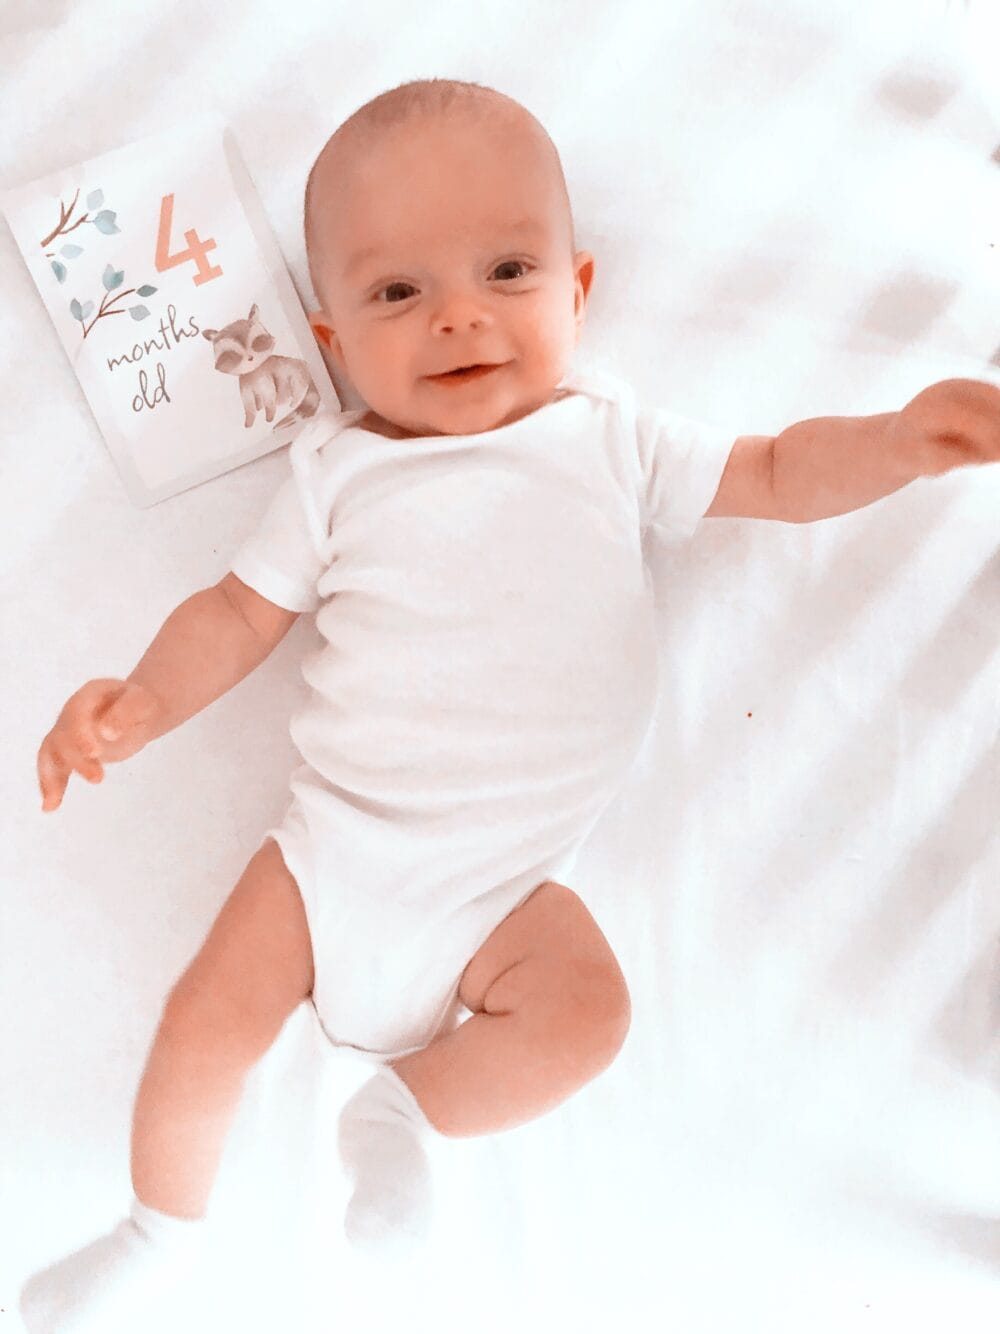 A baby laying on a bed with a book on it.